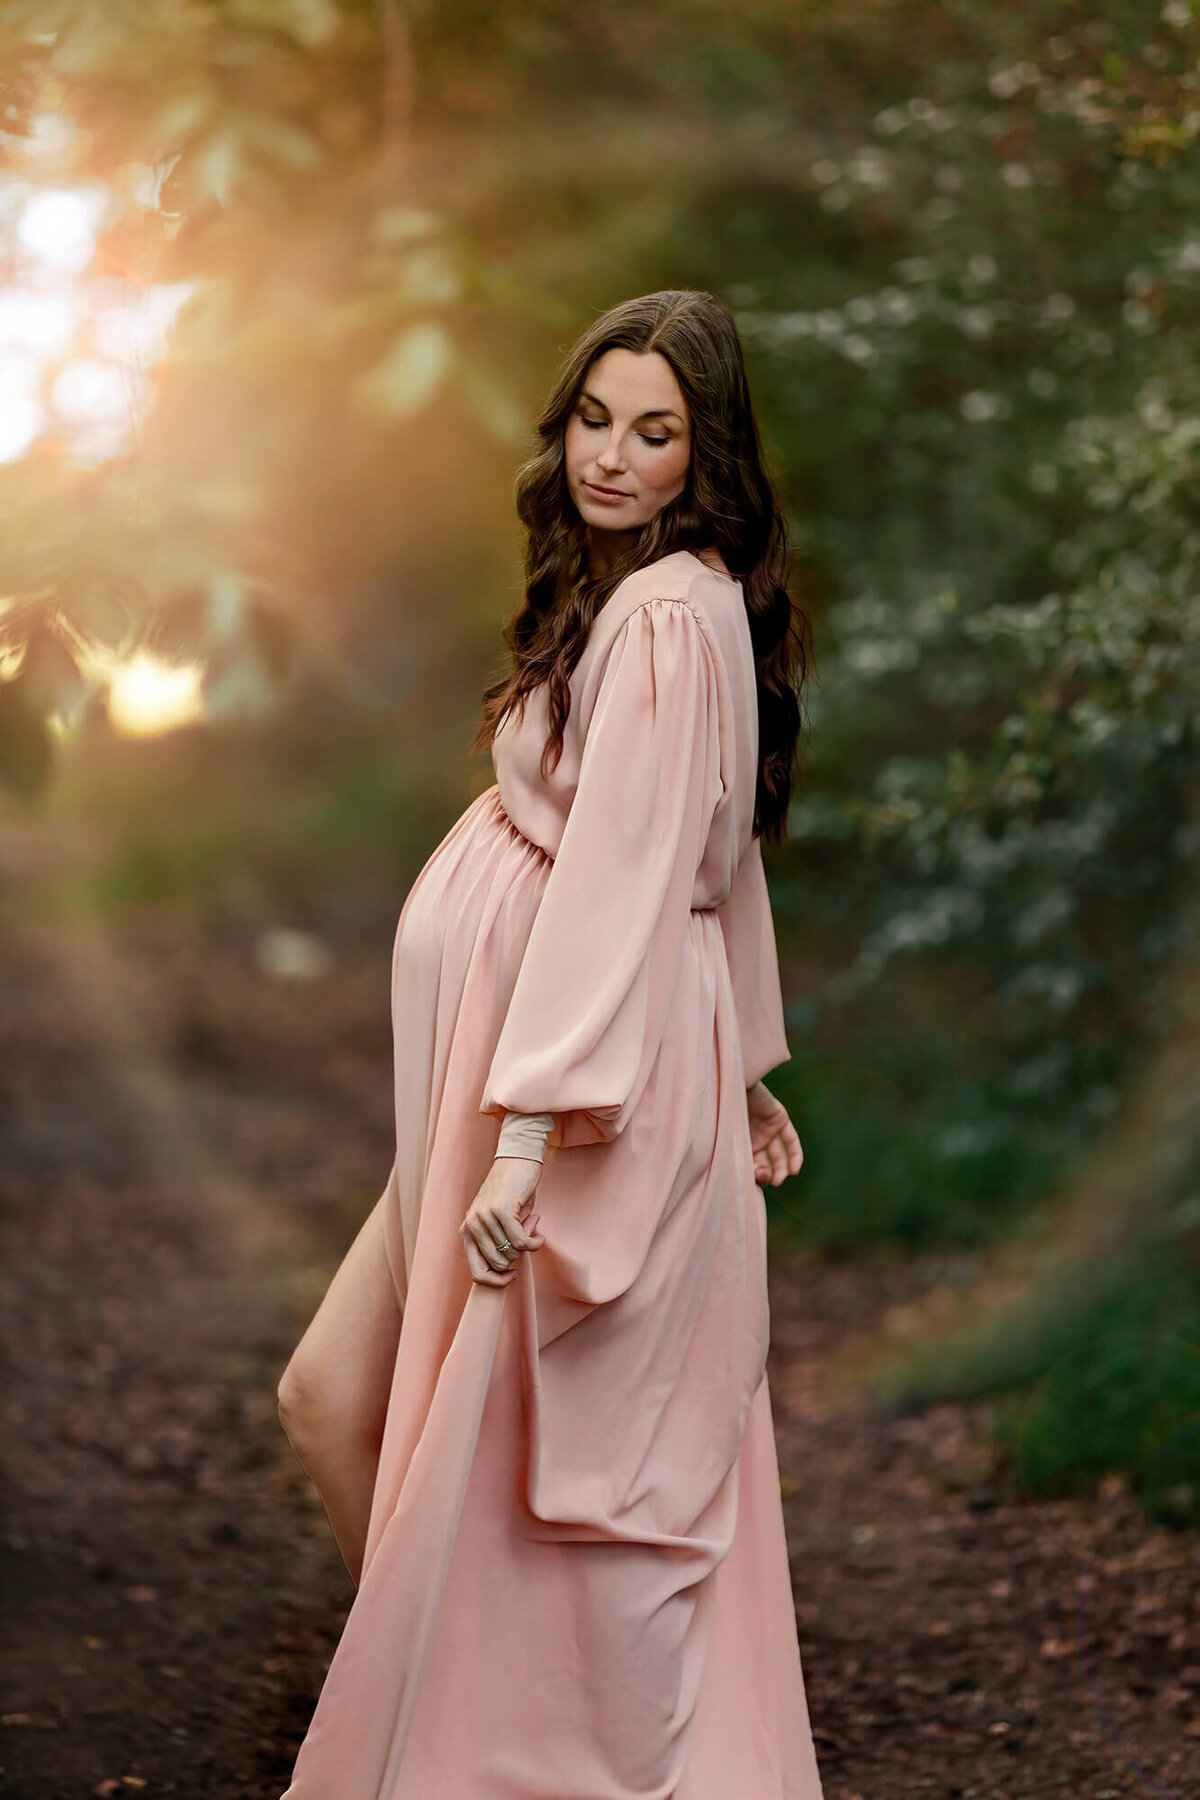 Very beautiful maternity model posing during golden hour in Houston, TX.